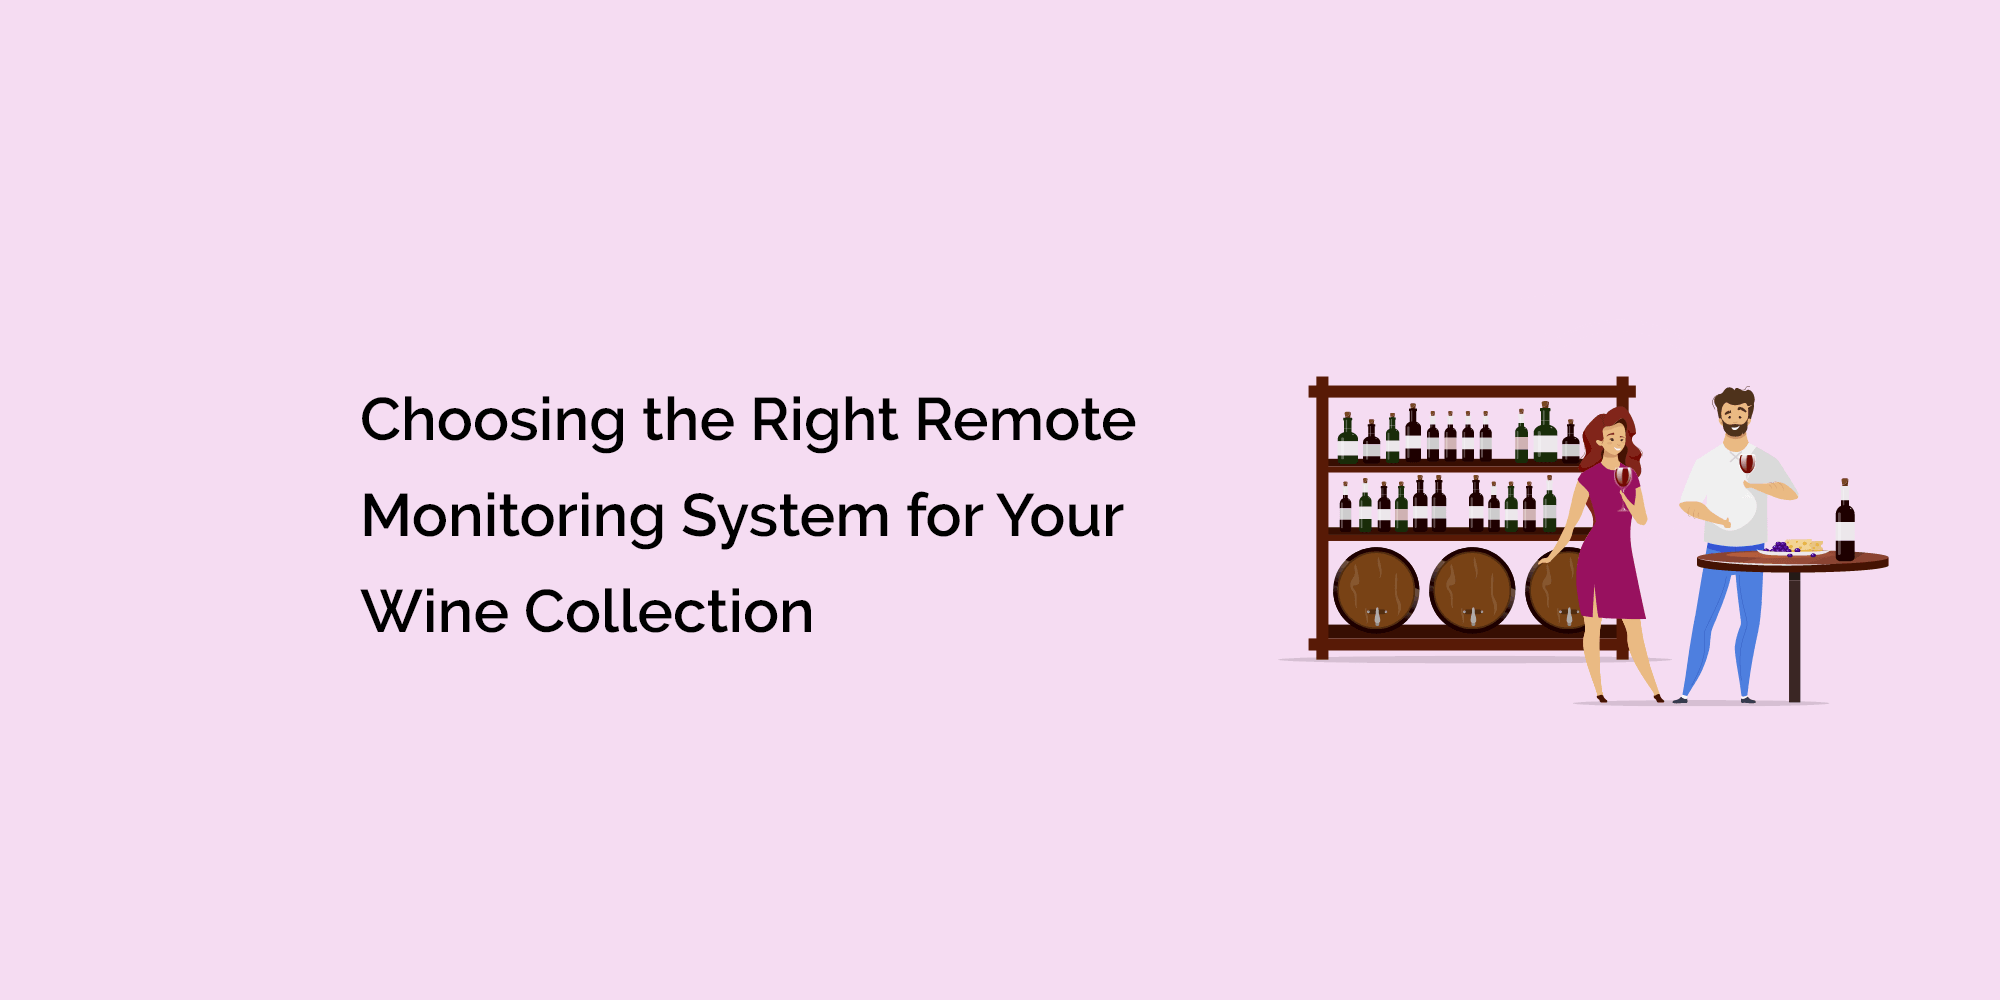 Choosing the Right Remote Monitoring System for Your Wine Collection